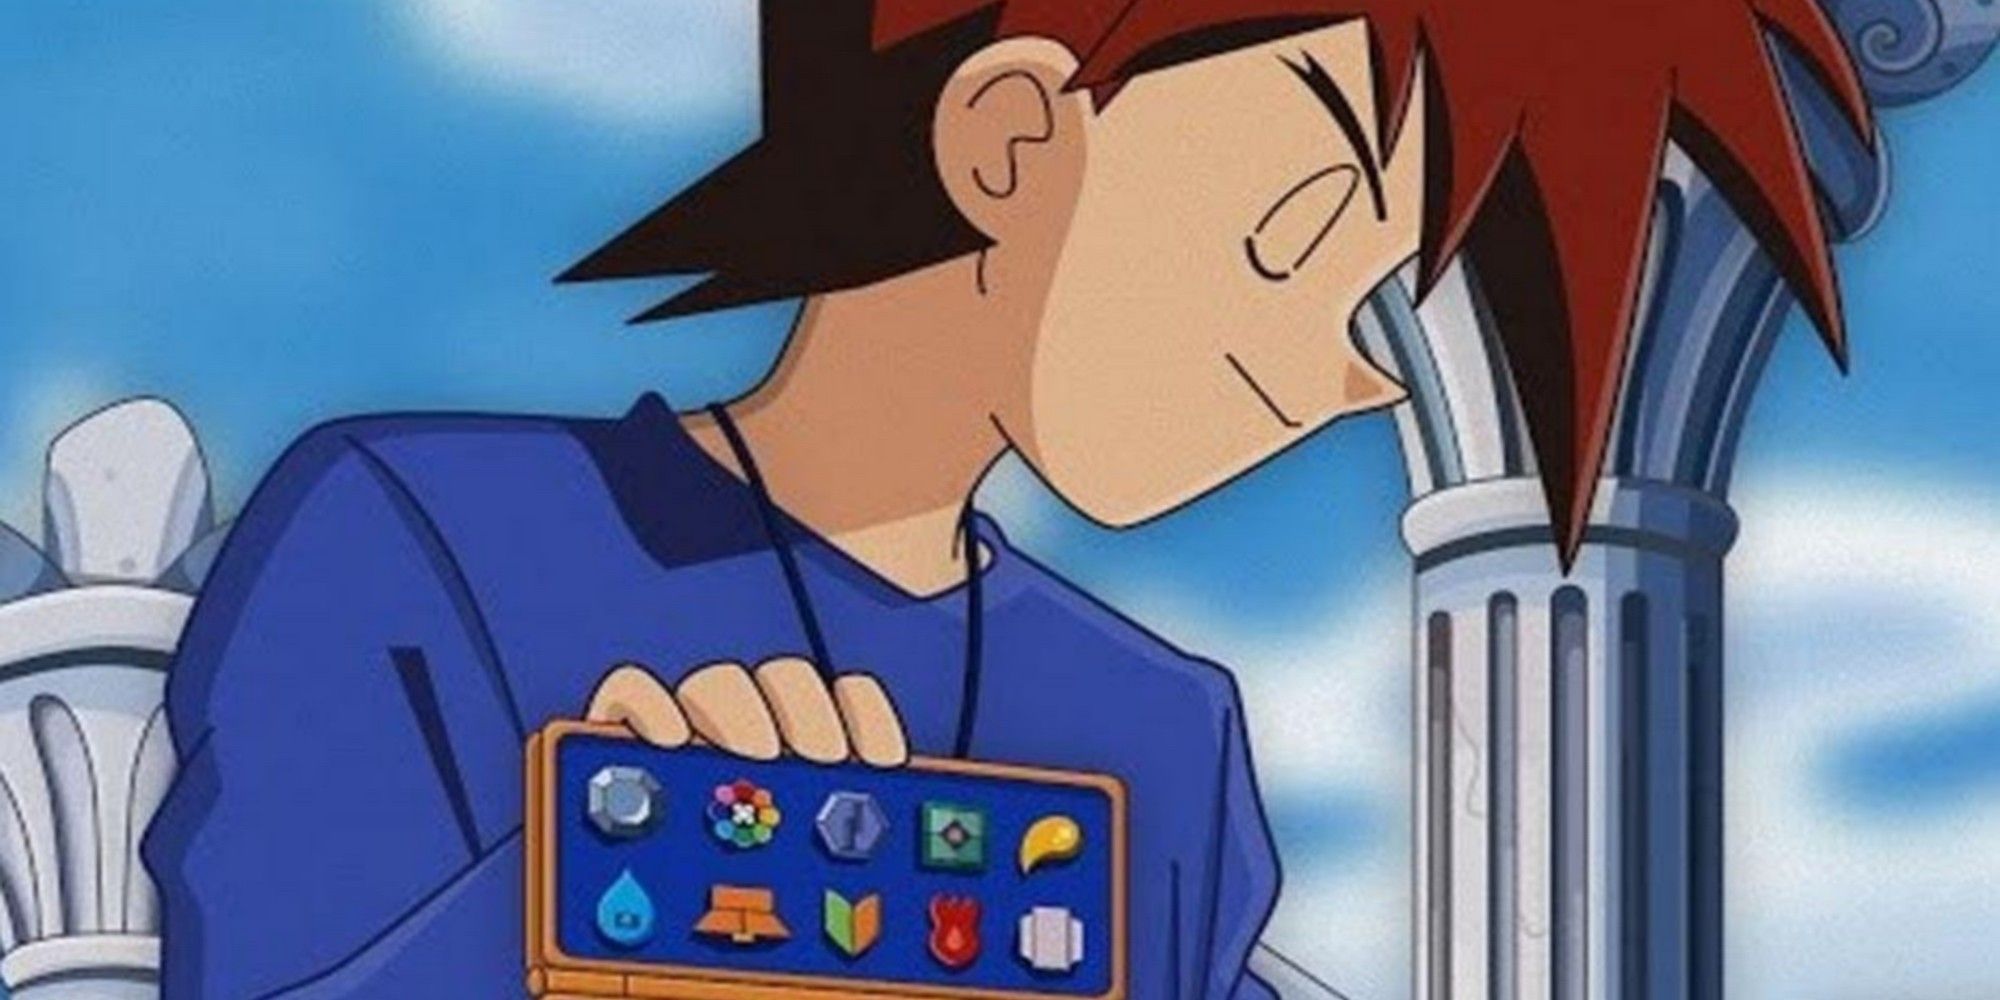 Gary Oak showing off his gym badges in the Pokemon anime